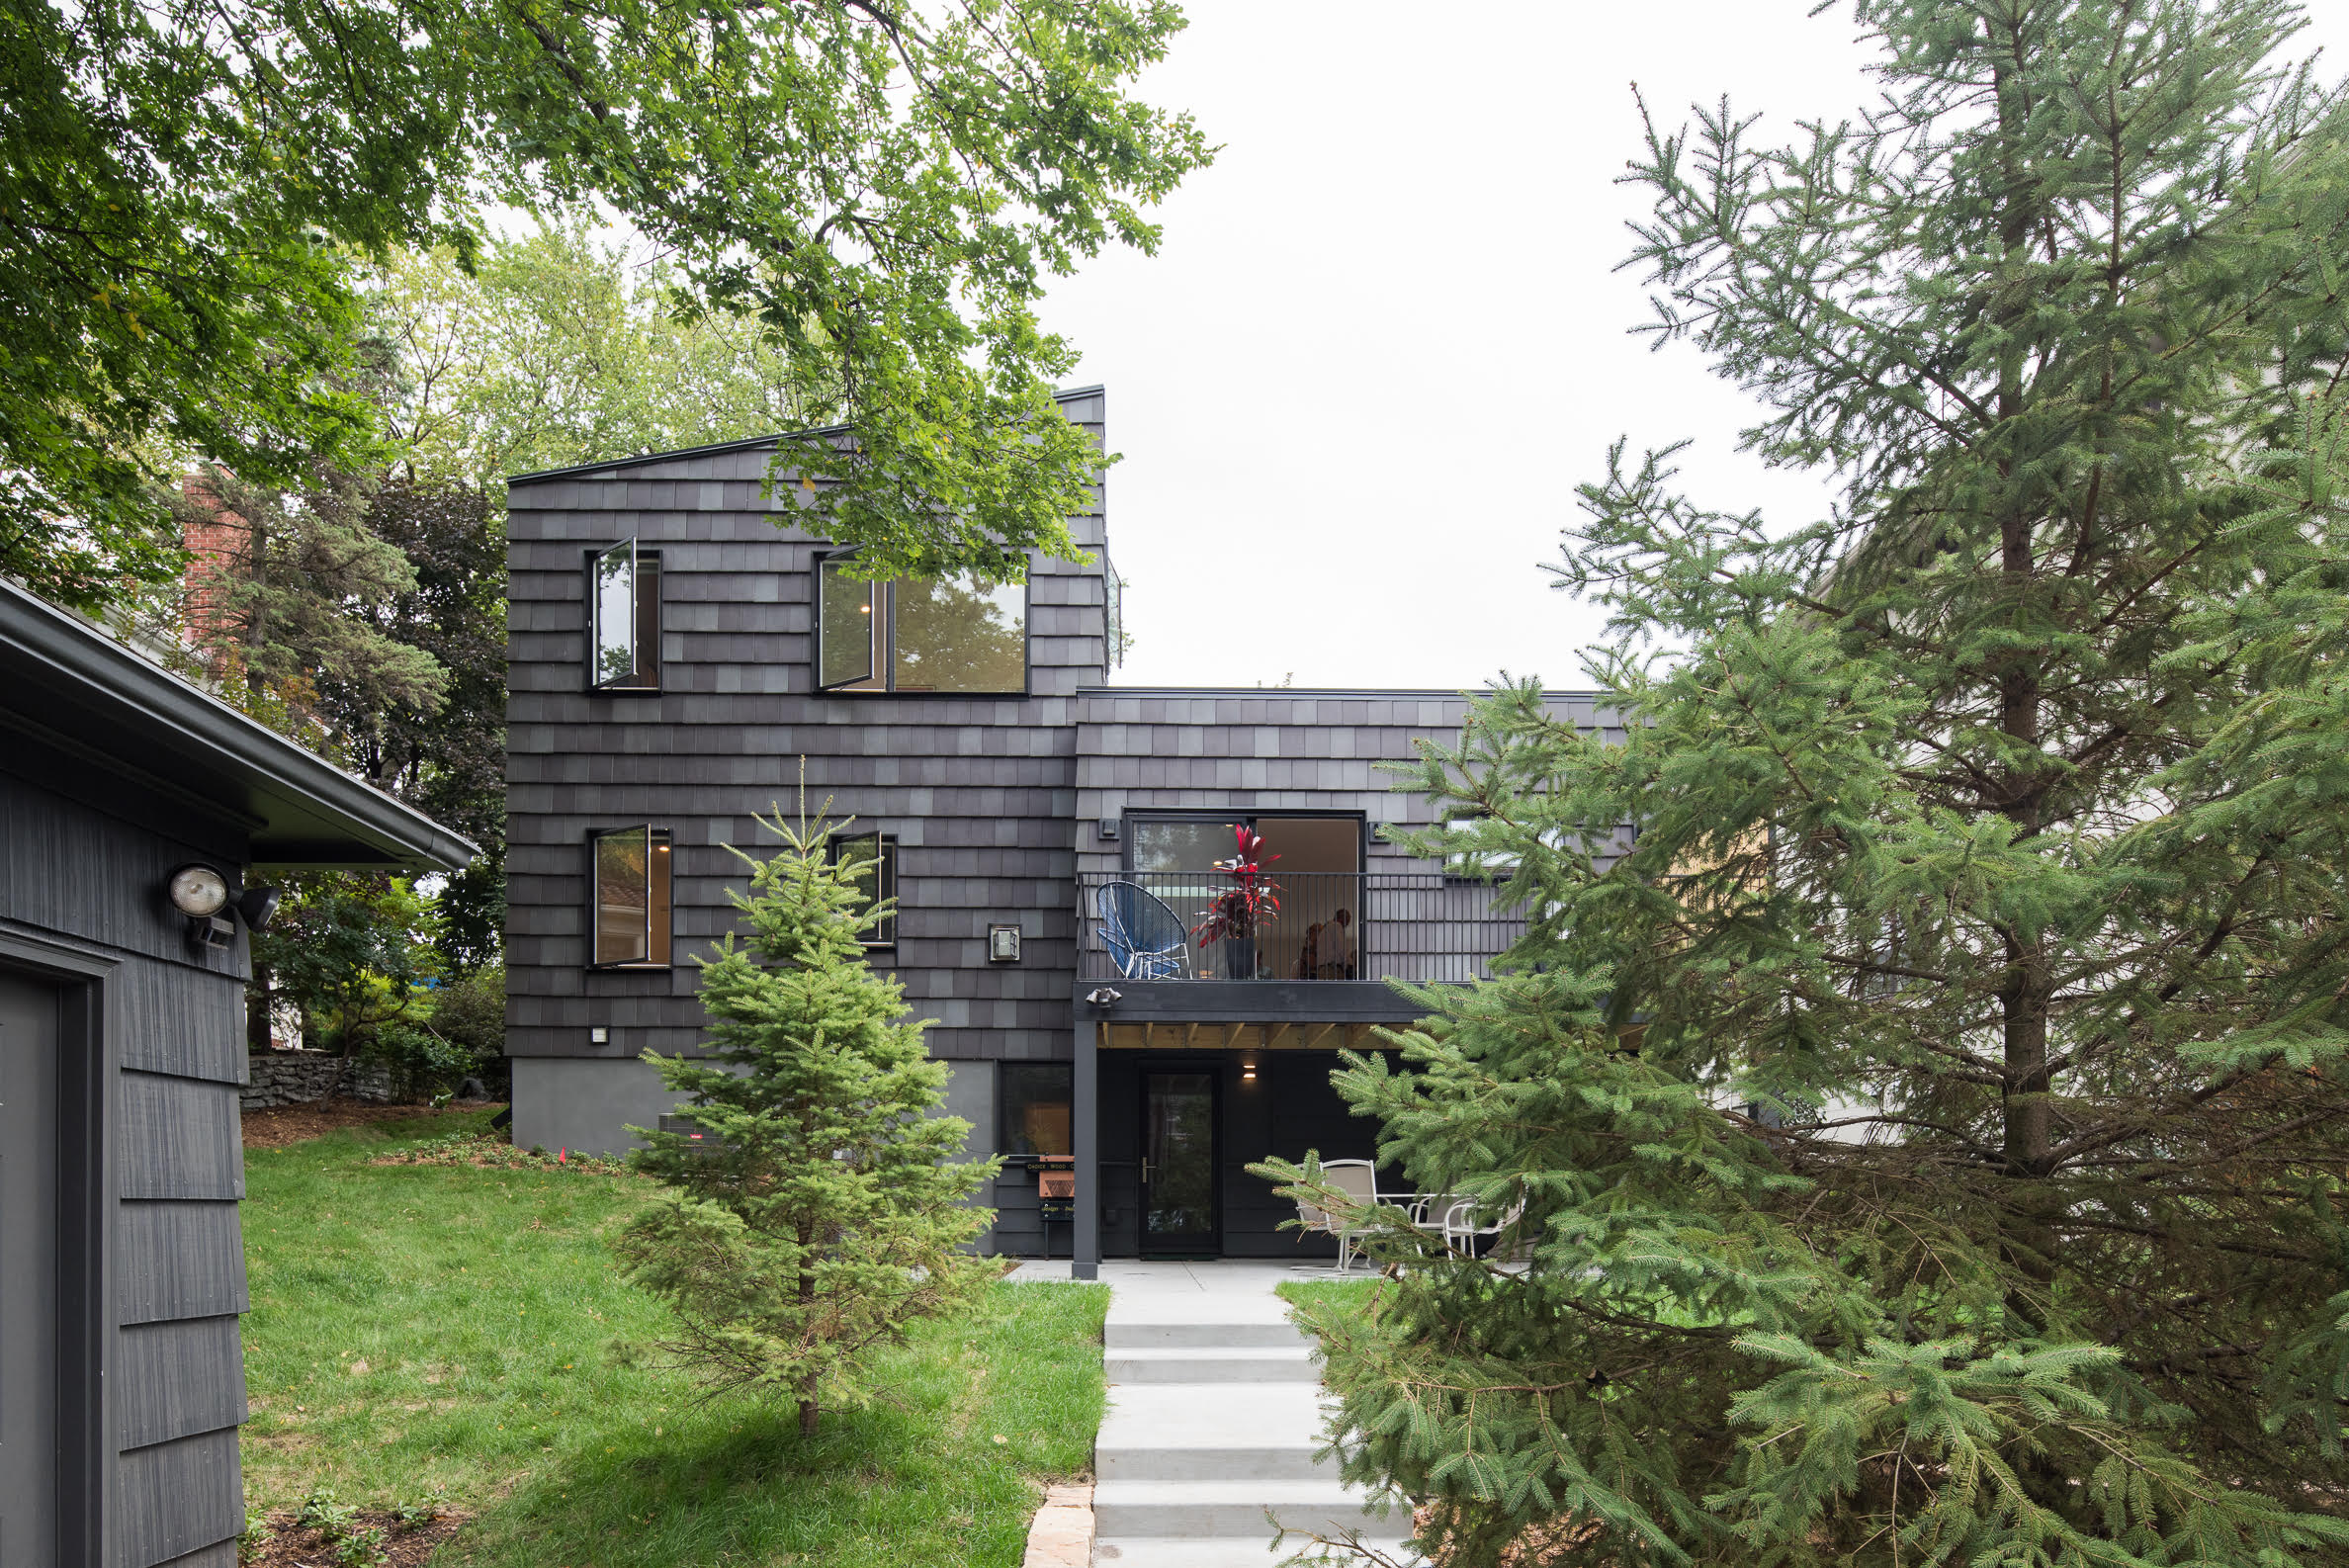 Black clay tile clad modern rambler renovation in Minneapolis by Christian Dean Architecture